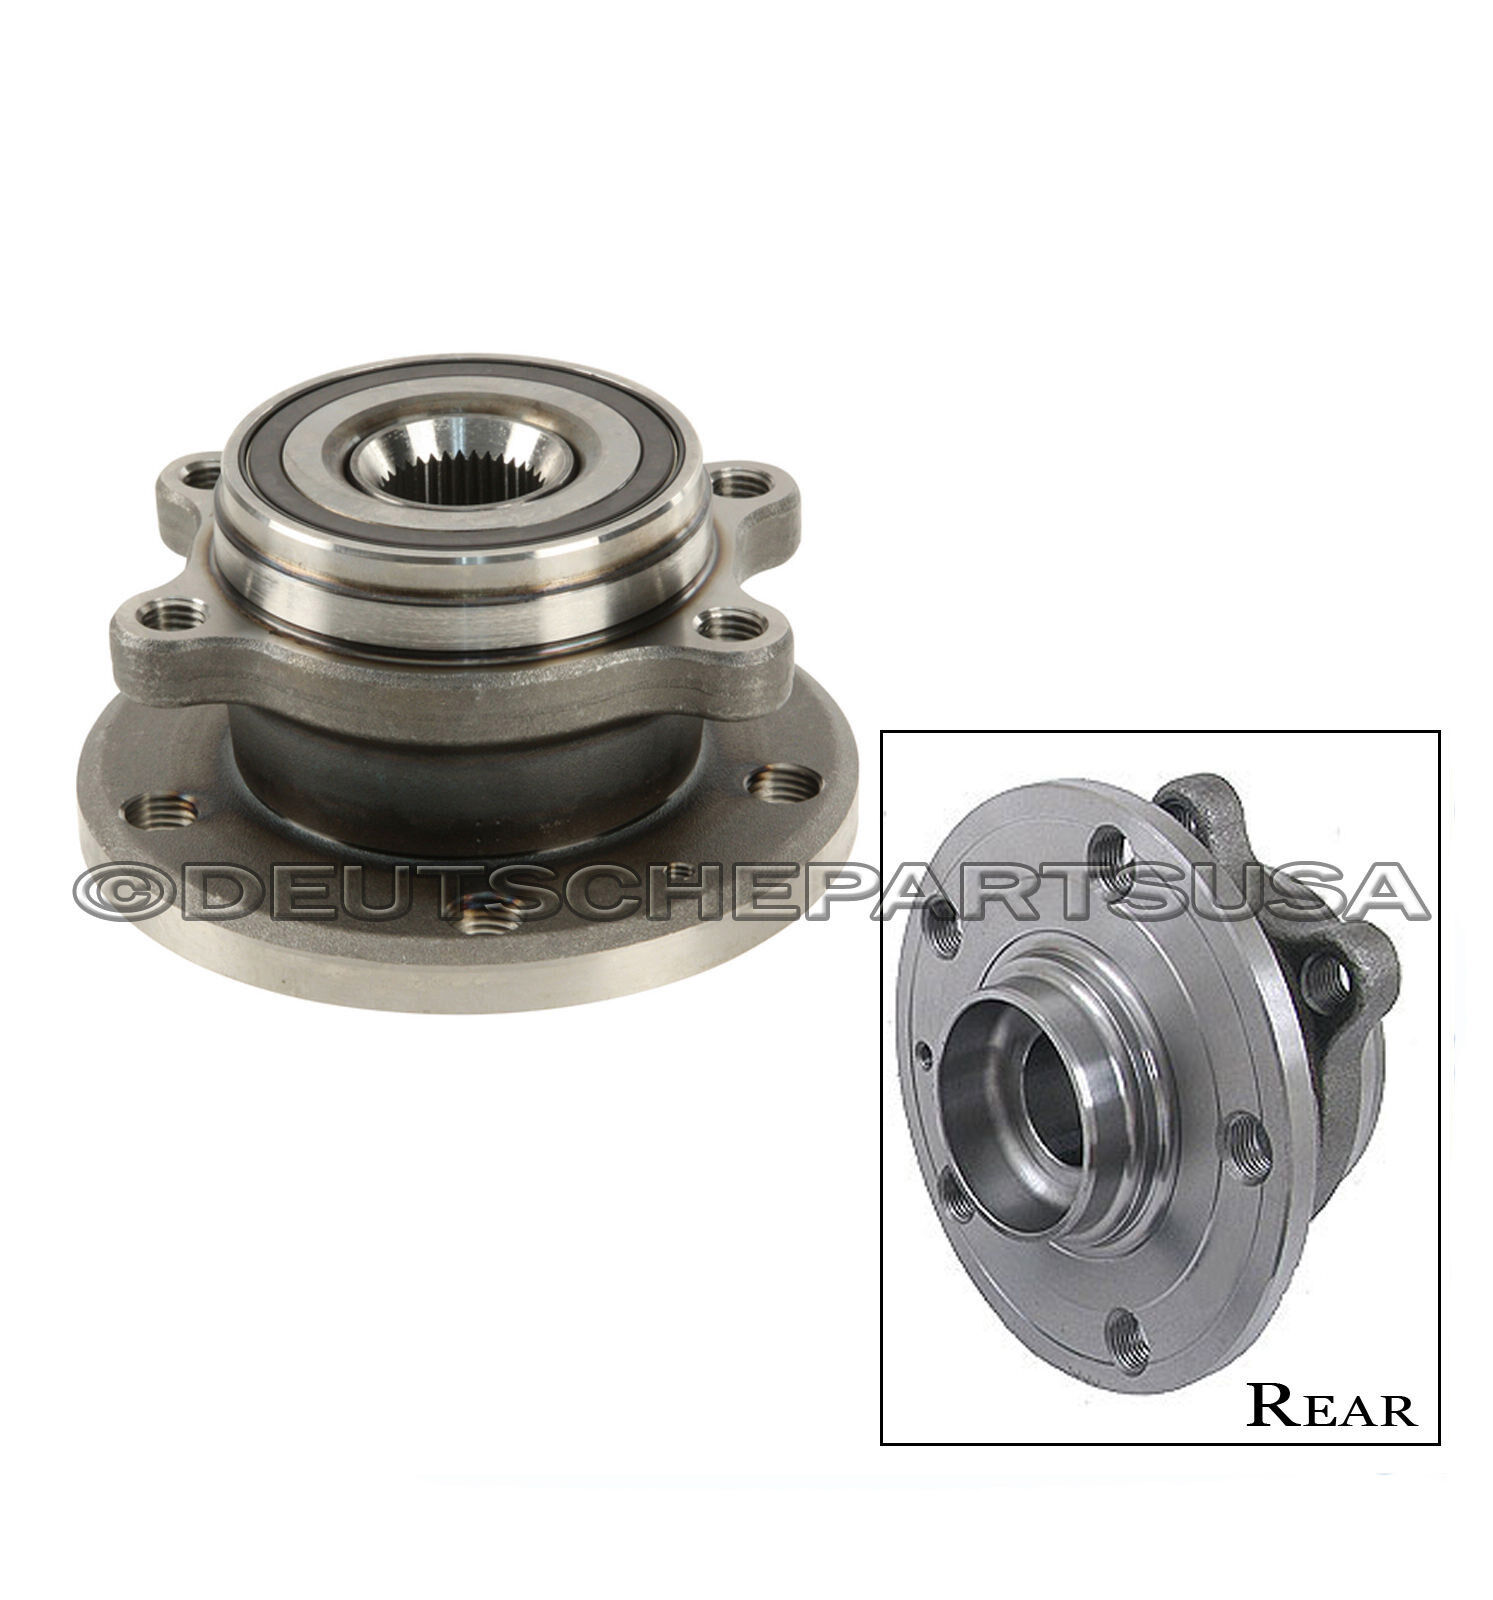 Audi A3 VW Eos GTI Golf Jetta R32 Rabbit Front Wheel HUB With Bearing Assembly